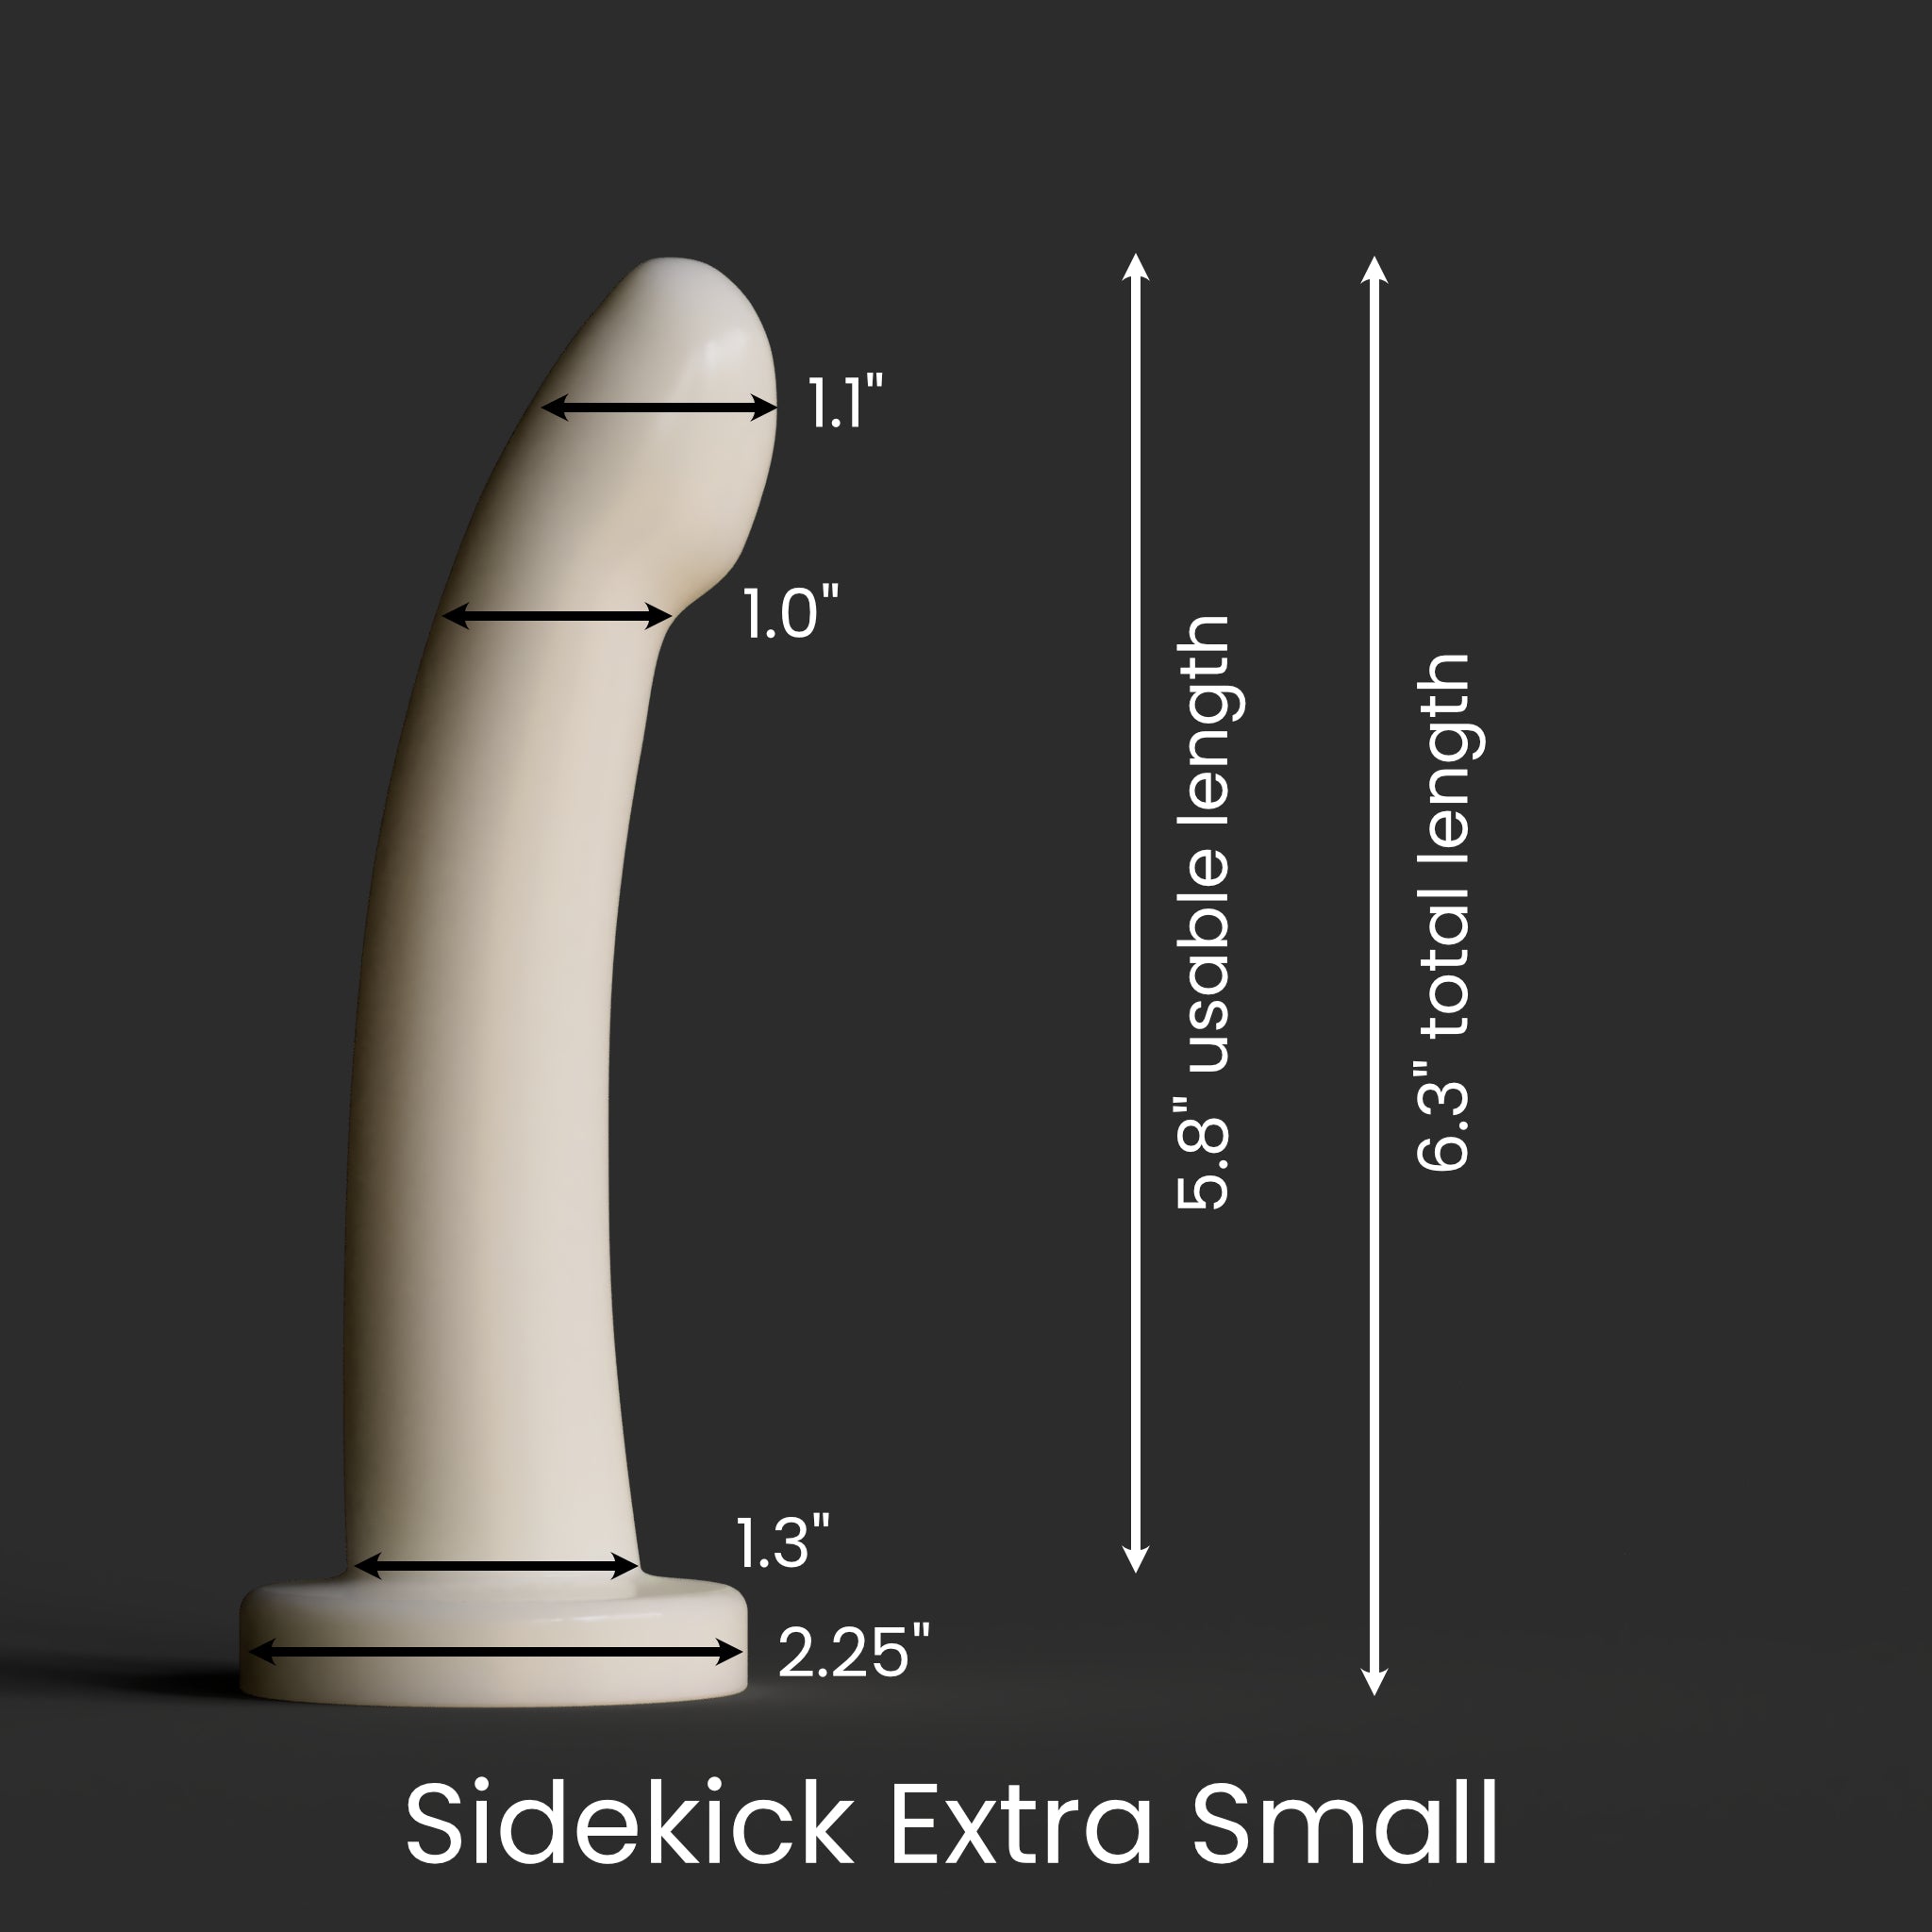 Diagram showing the dimensions of the Sidekick XS as described in the product description.